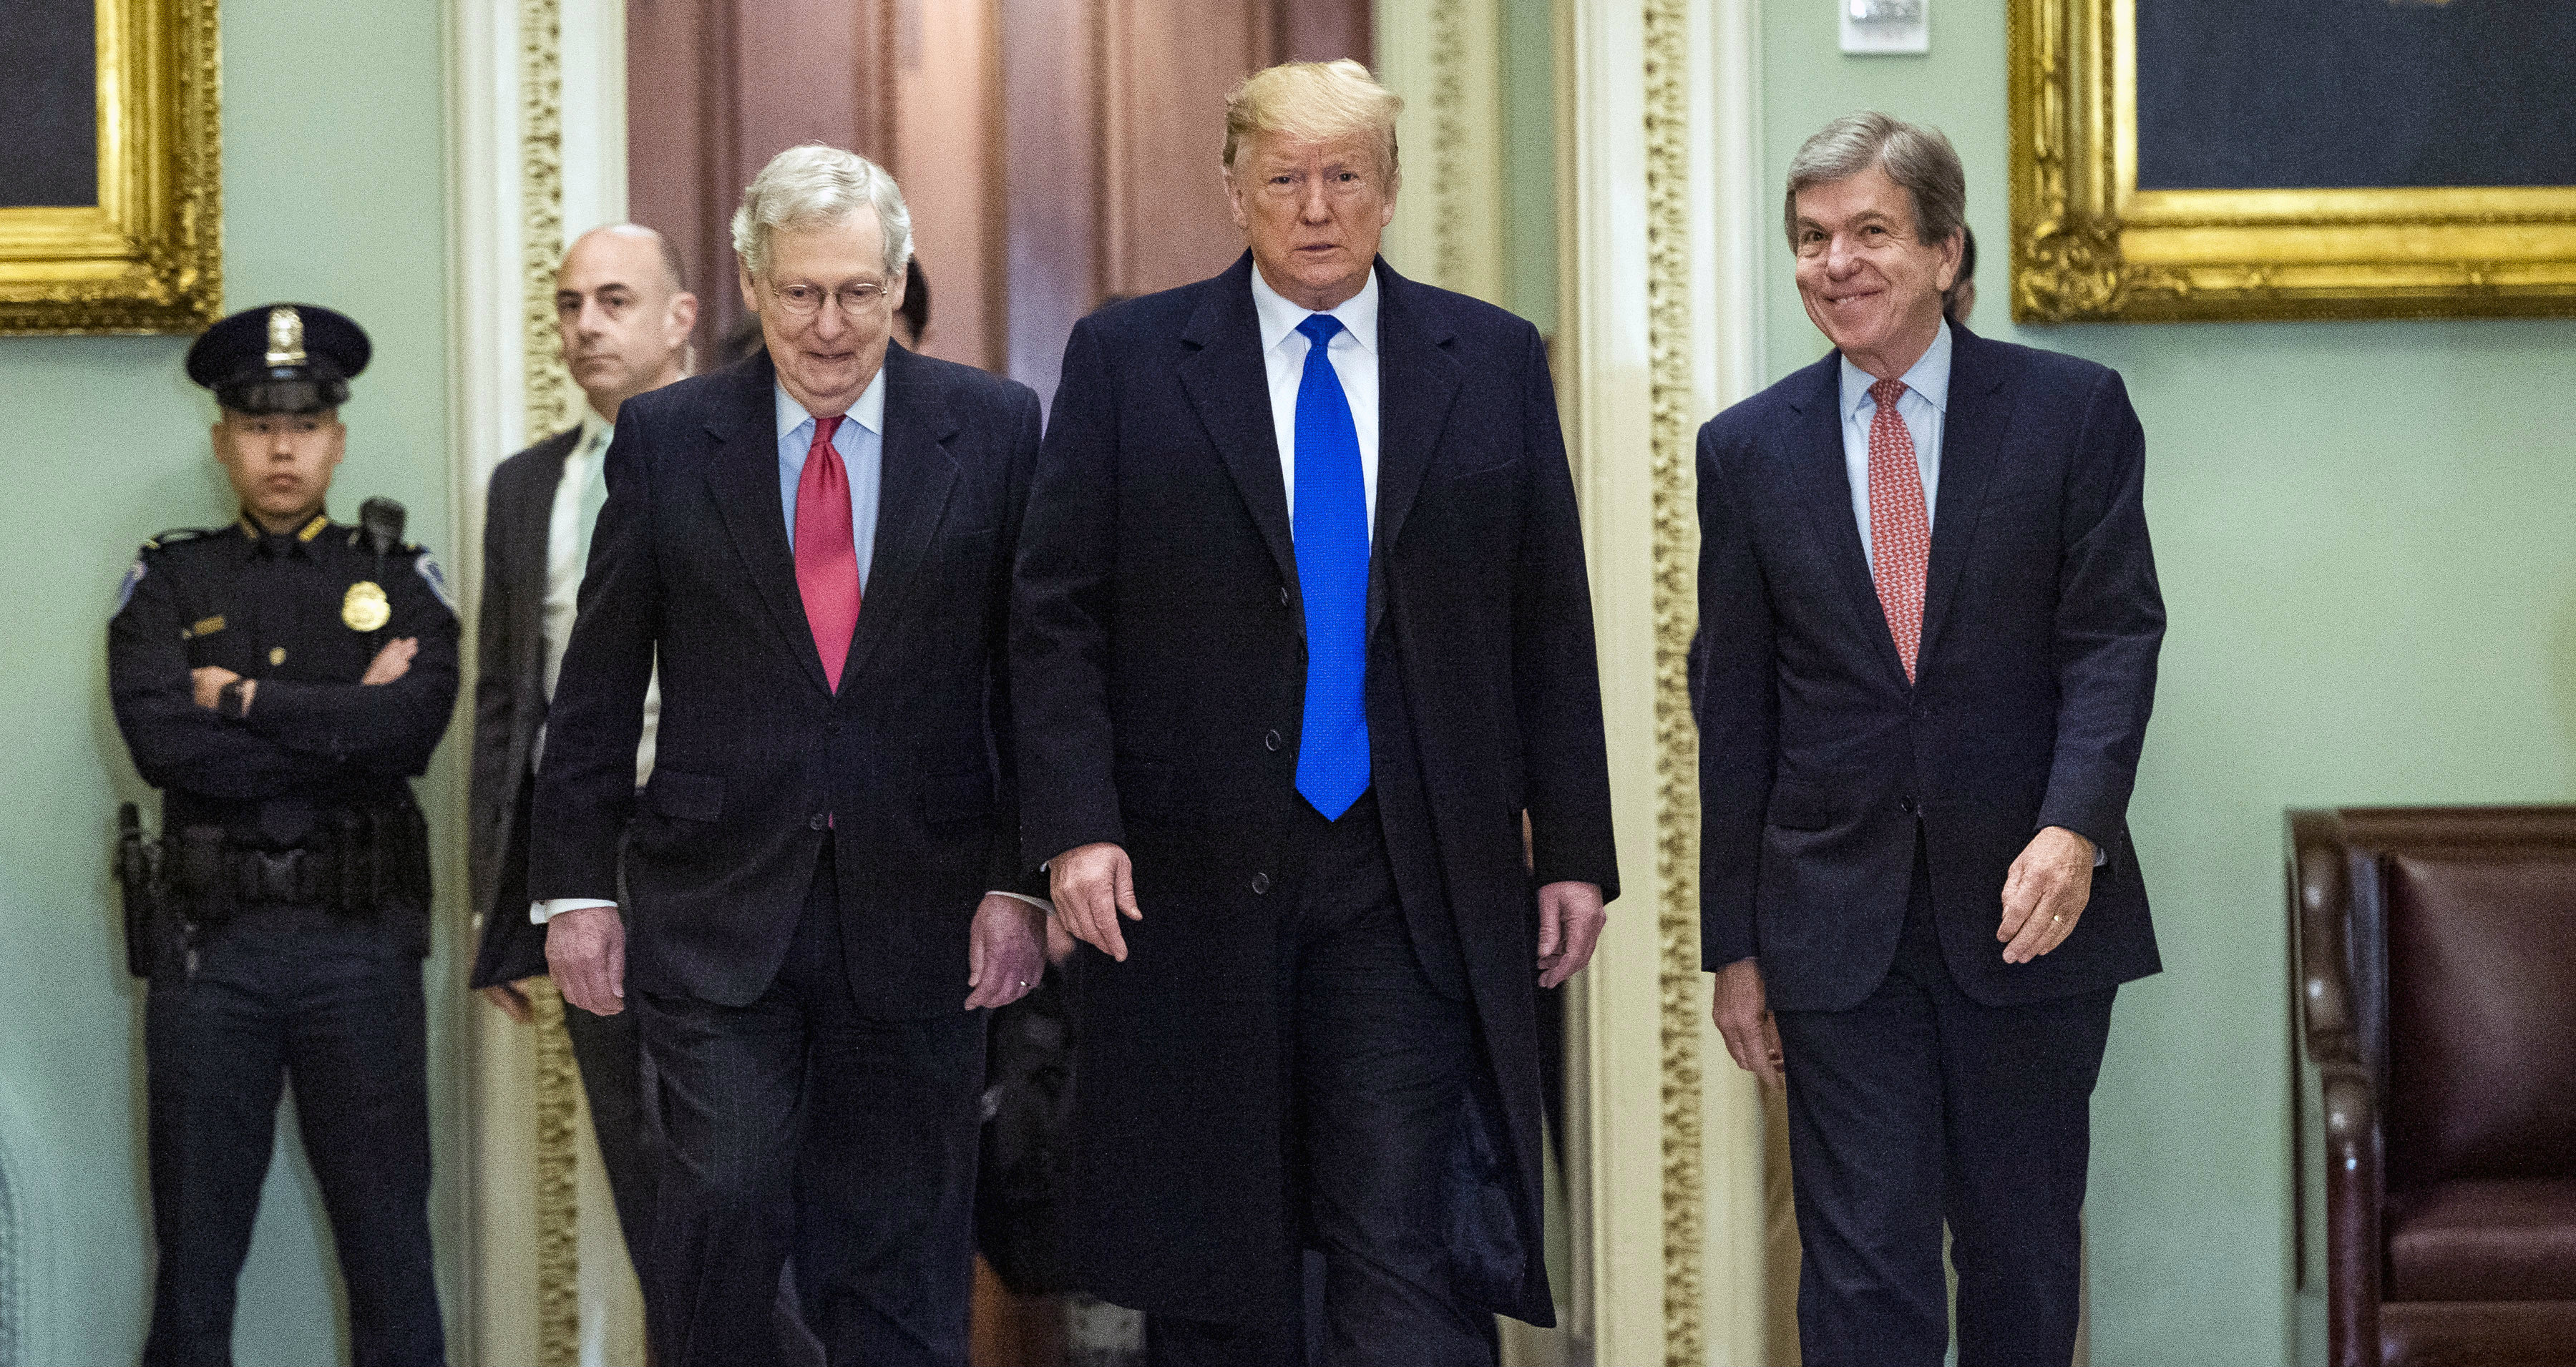 Donald Trump is flanked by Senate Majority Leader Mitch McConnell (left) and Sen. Roy Blunt as he arrives for a luncheon with Senate Republicans at the Capitol on Tuesday.